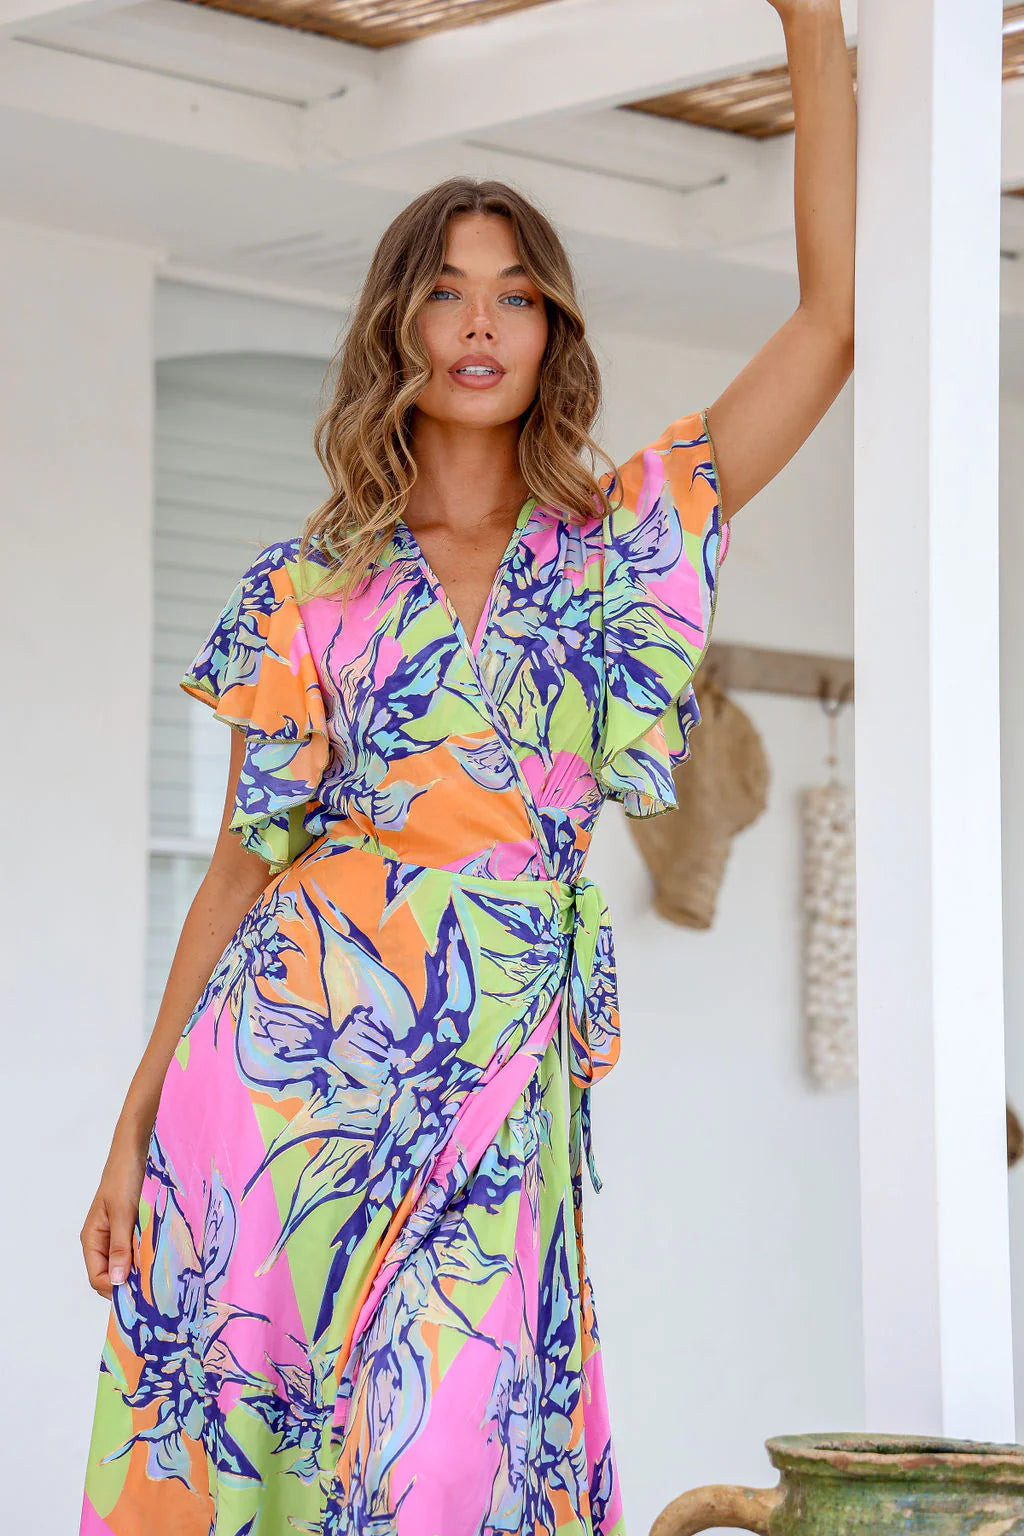 ***NEW*** Ava Wrap Midi Dress: Introducing the Ava Wrap Dress in the new Lime Print, perfect for adding a fresh pop of color to your wardrobe! This signature silk blend dress is bright and bold, m - Ciao Bella Dresses 